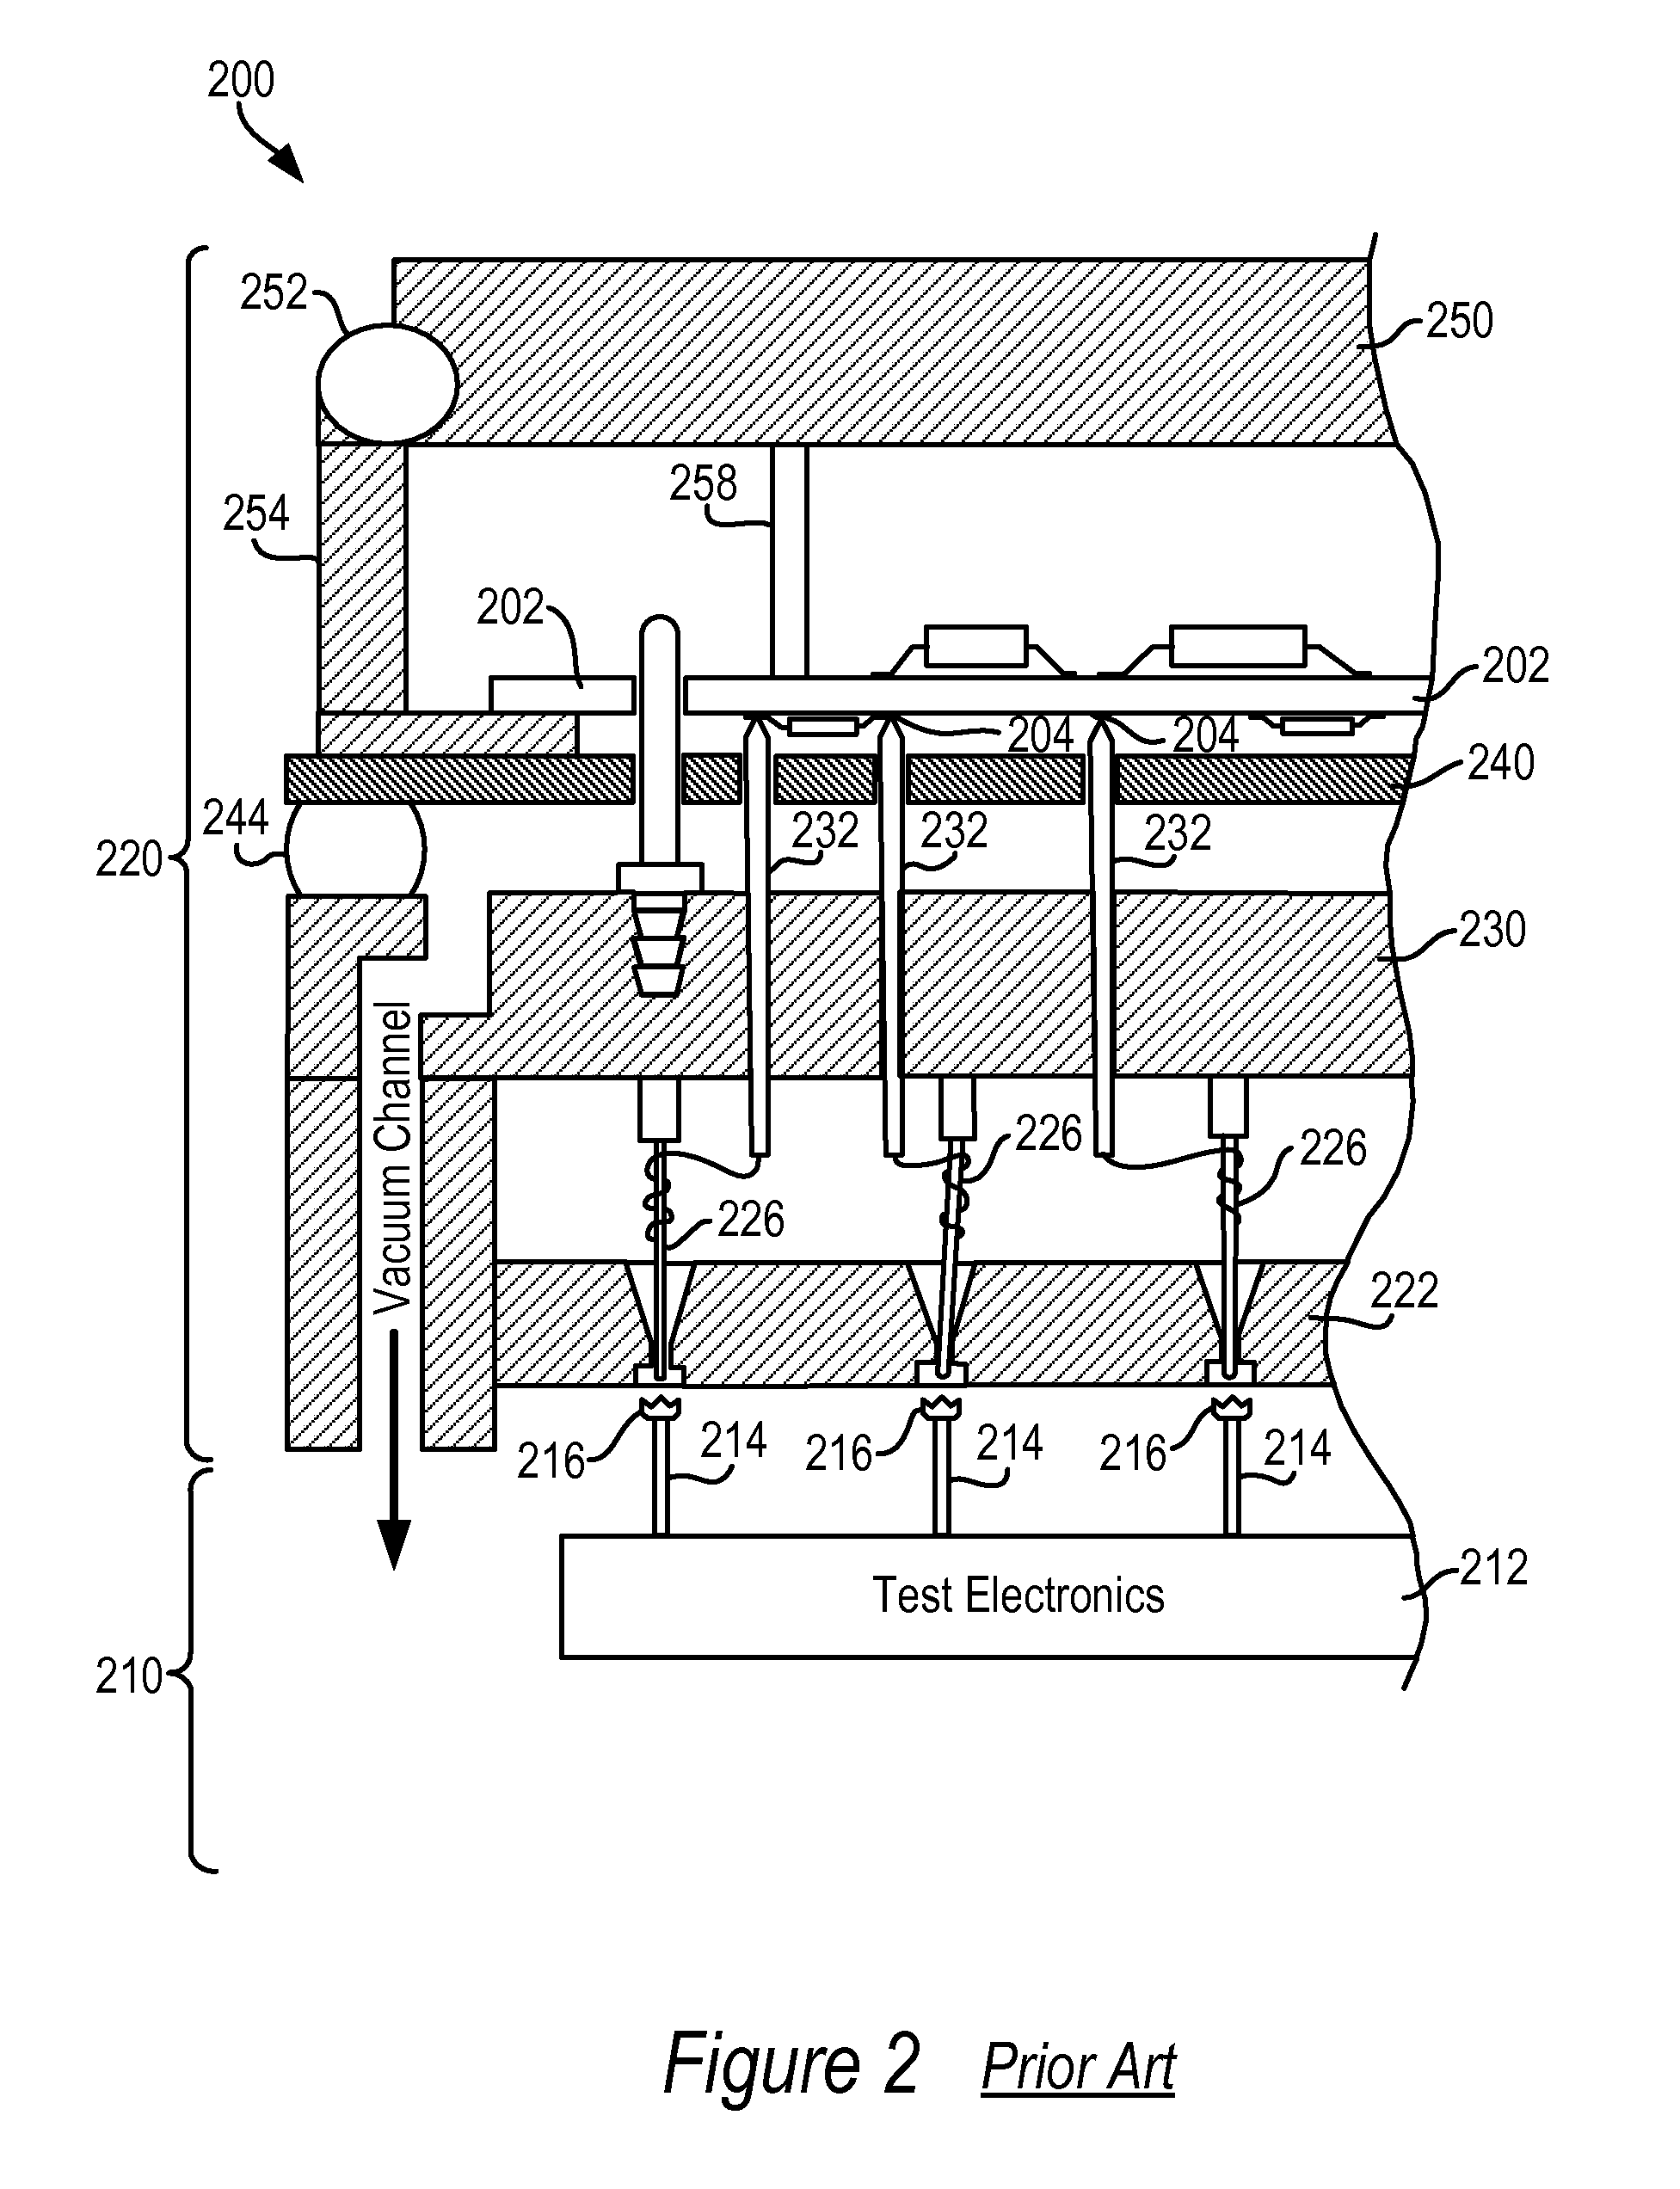 Method for improving a printed circuit board development cycle